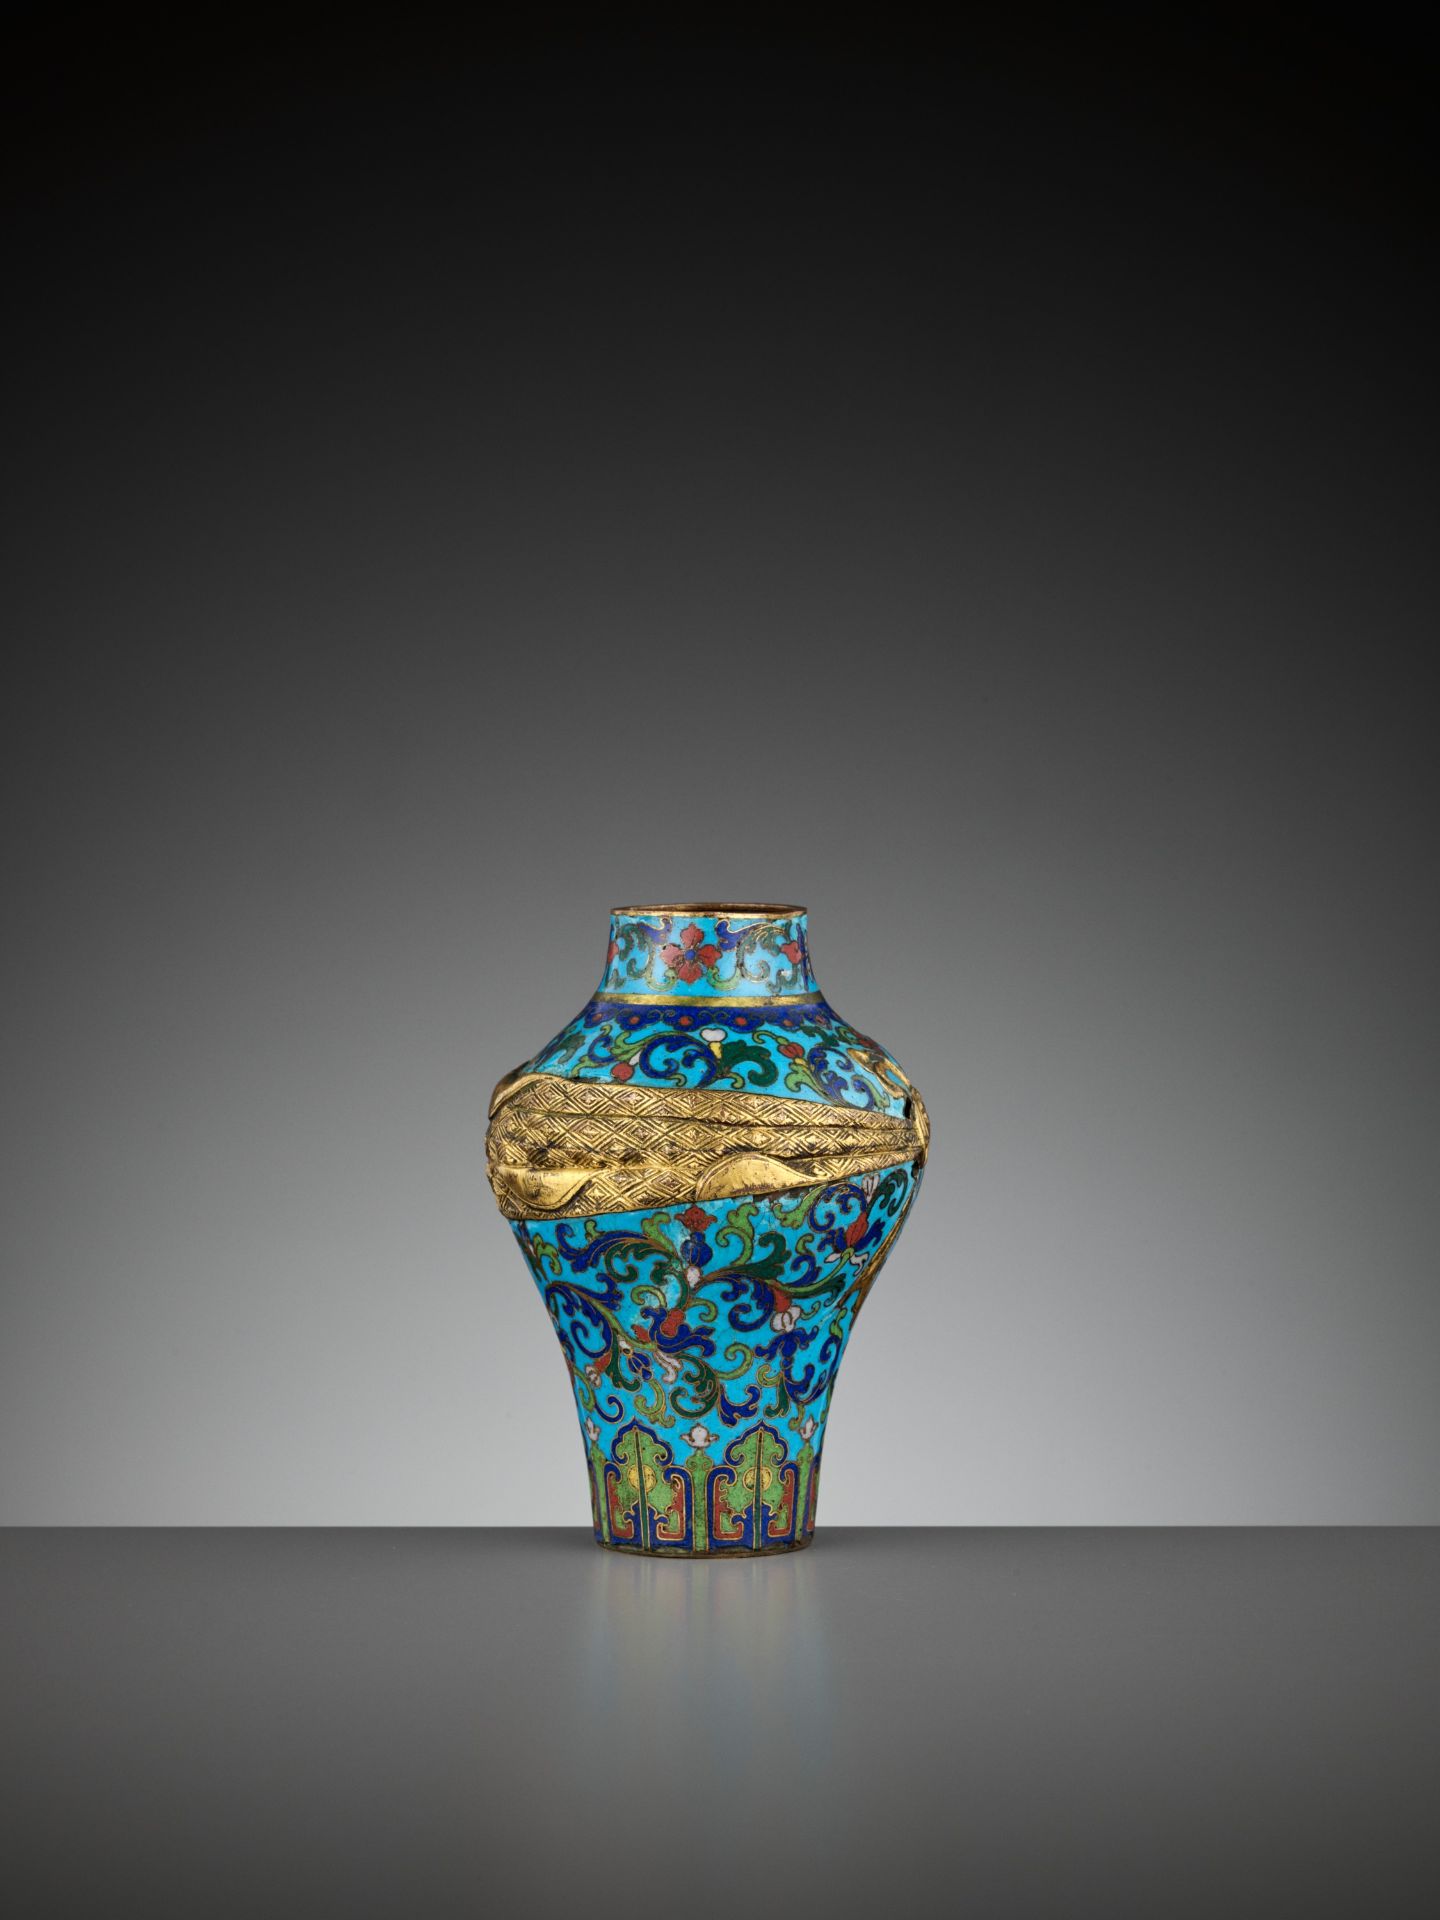 A RARE CLOISONNE ENAMEL 'SASH-TIED' BALUSTER VASE, ATTRIBUTED TO THE IMPERIAL WORKSHOPS, QIANLONG - Image 6 of 10